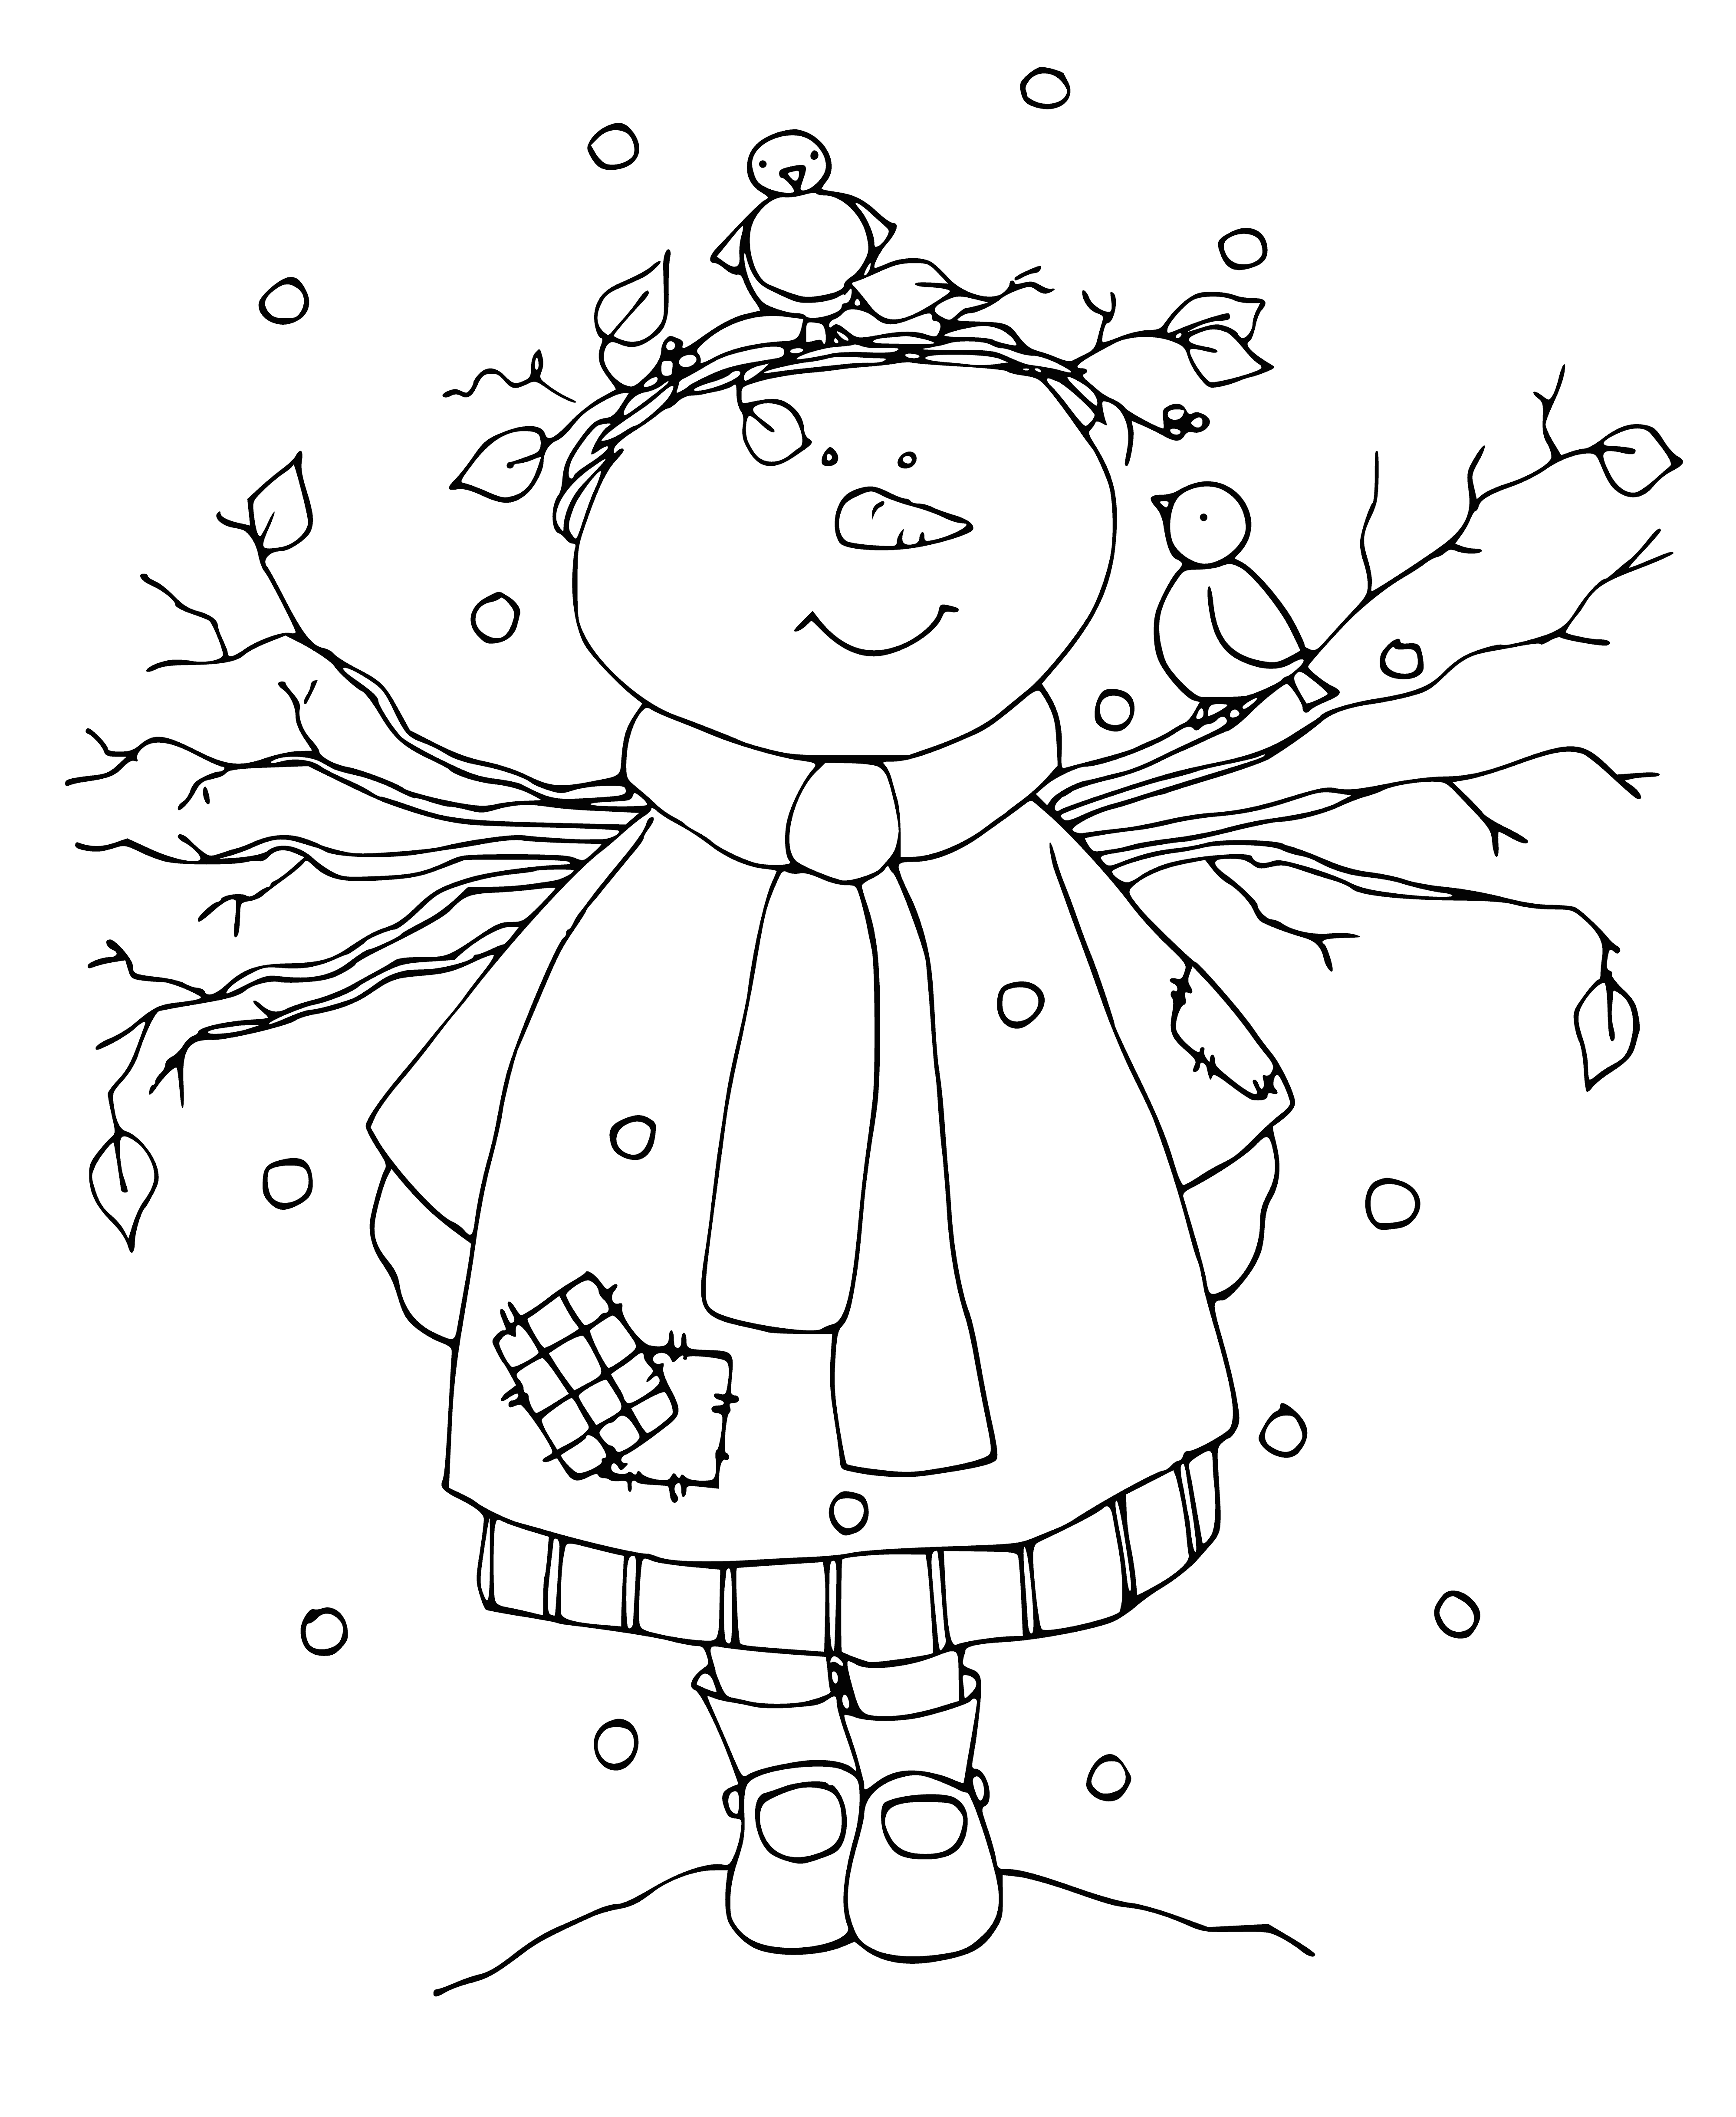 coloring page: Beautiful fairy with three snowmen in her arms surrounded by sparkling snow and a starry night sky.